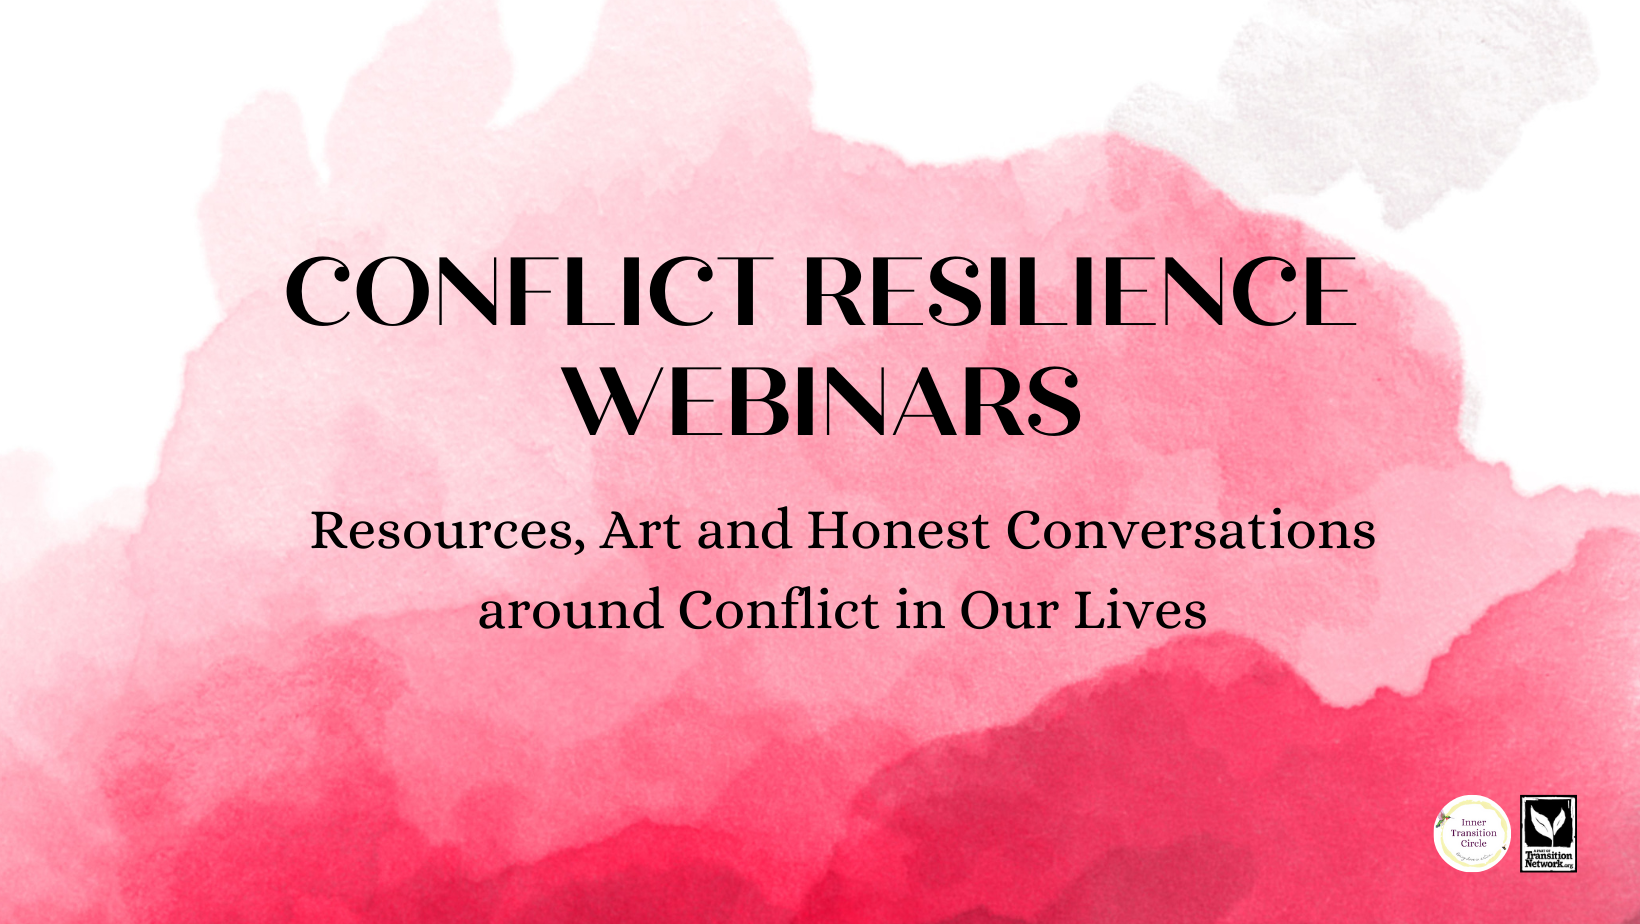 The Conflict Resilience Series